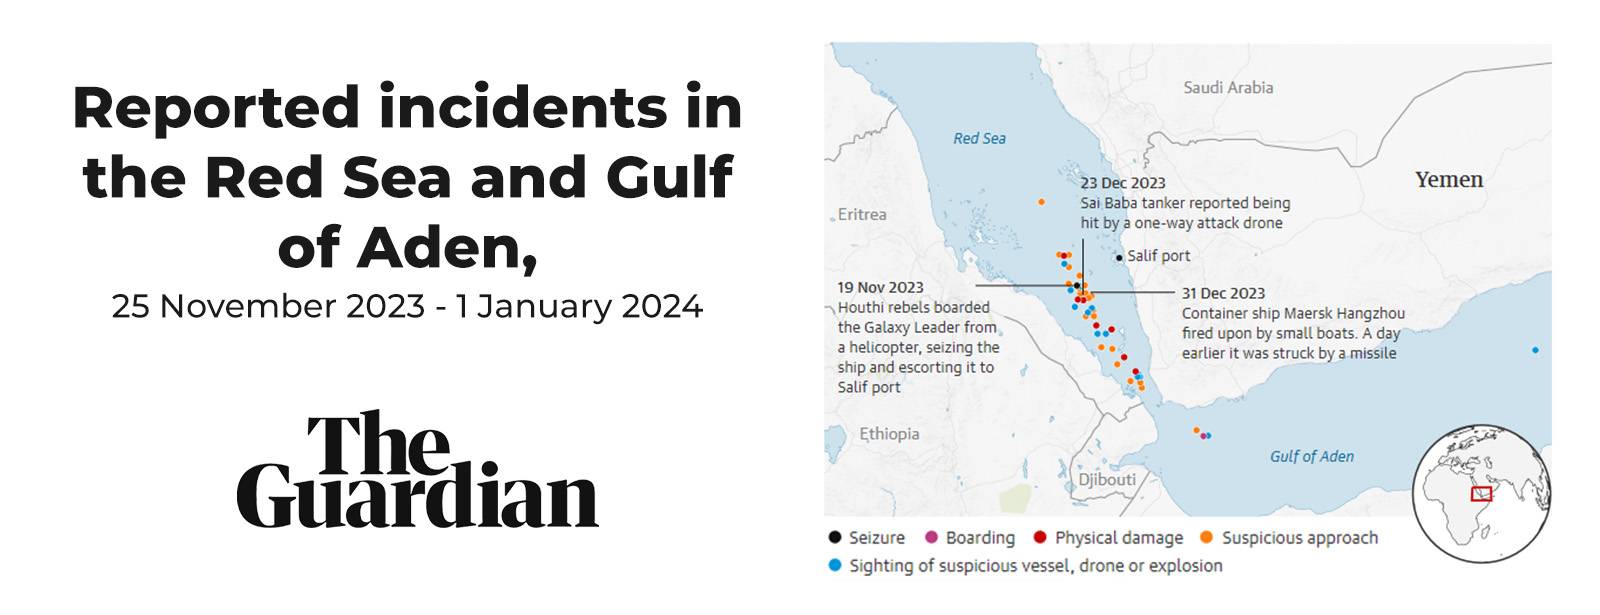 Reported Incidents at the Red Sea and Gulf of Aden